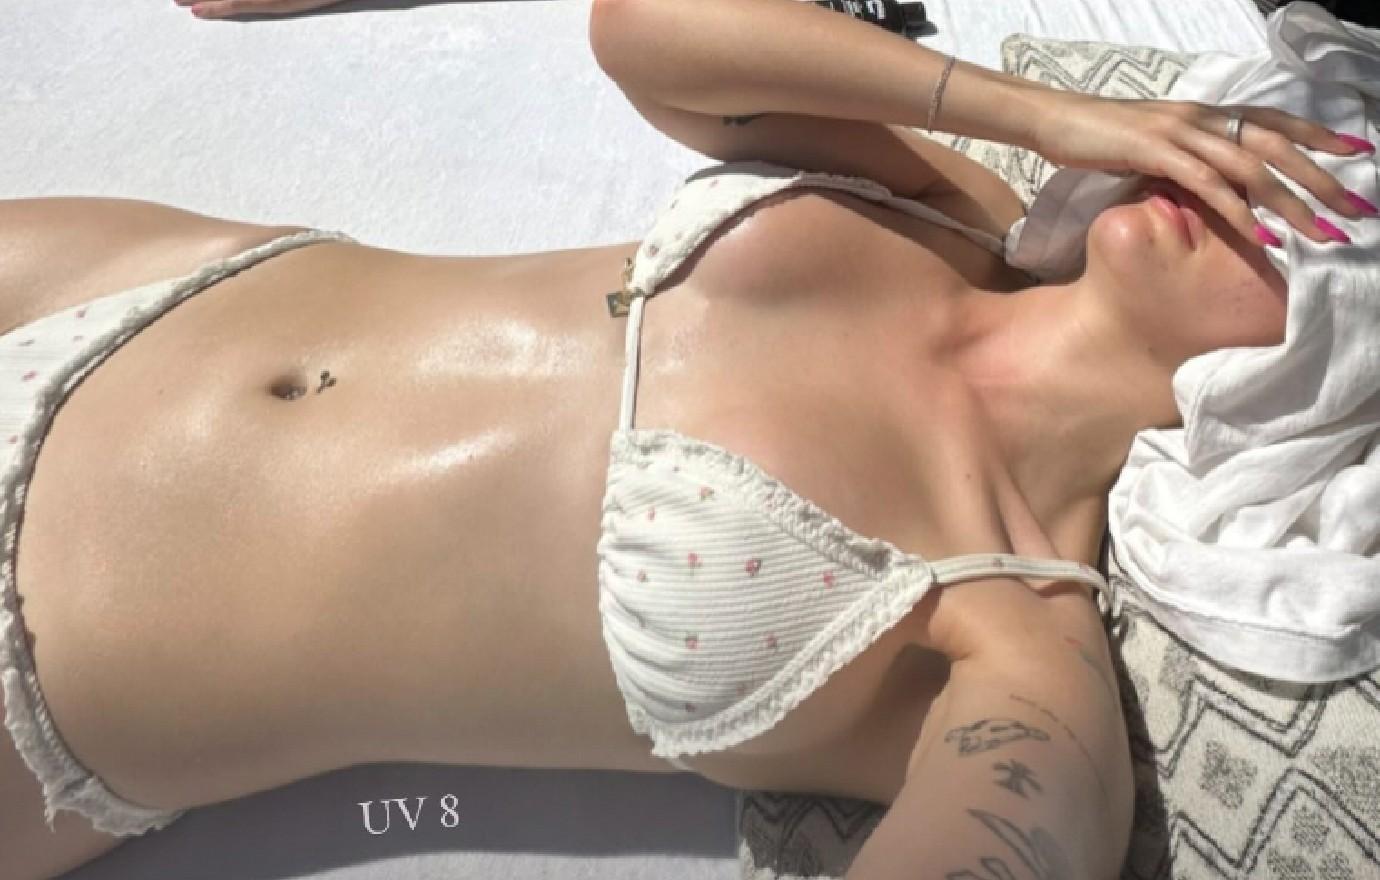 Christie Anne OnlyFans Pictures That Will Make You Weak in the Knees